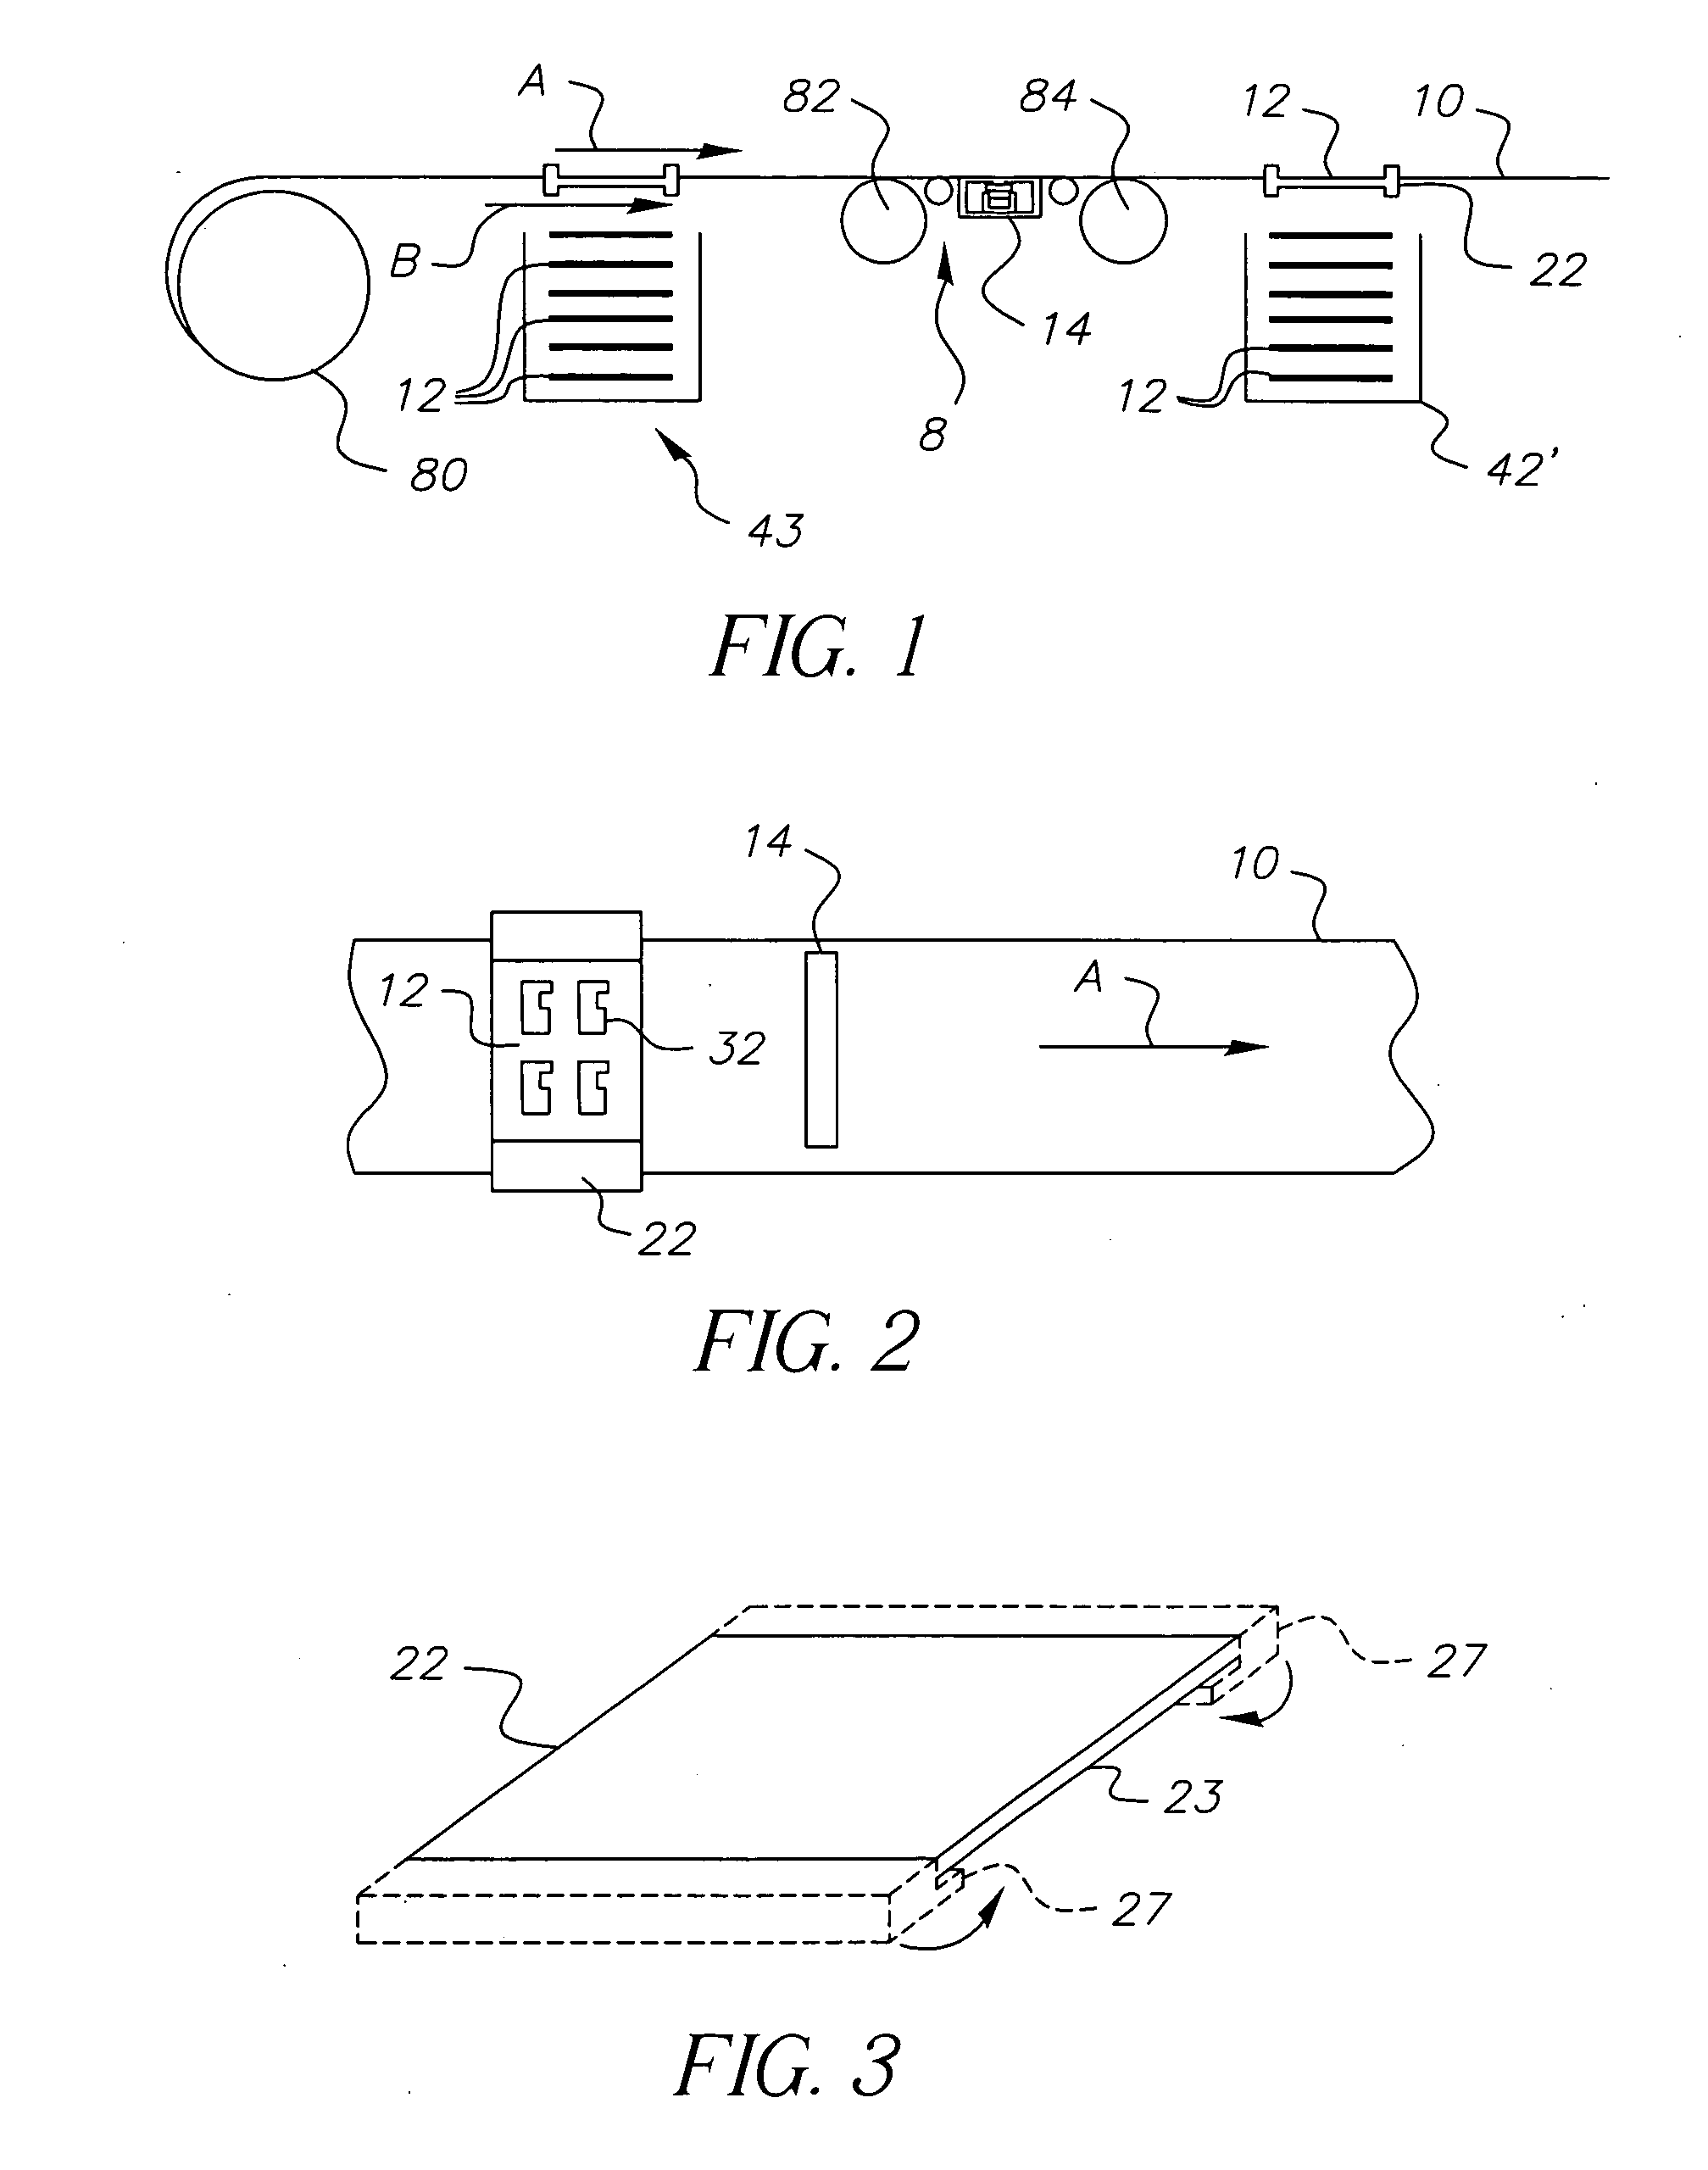 Continuous manufacture of flat panel light emitting devices